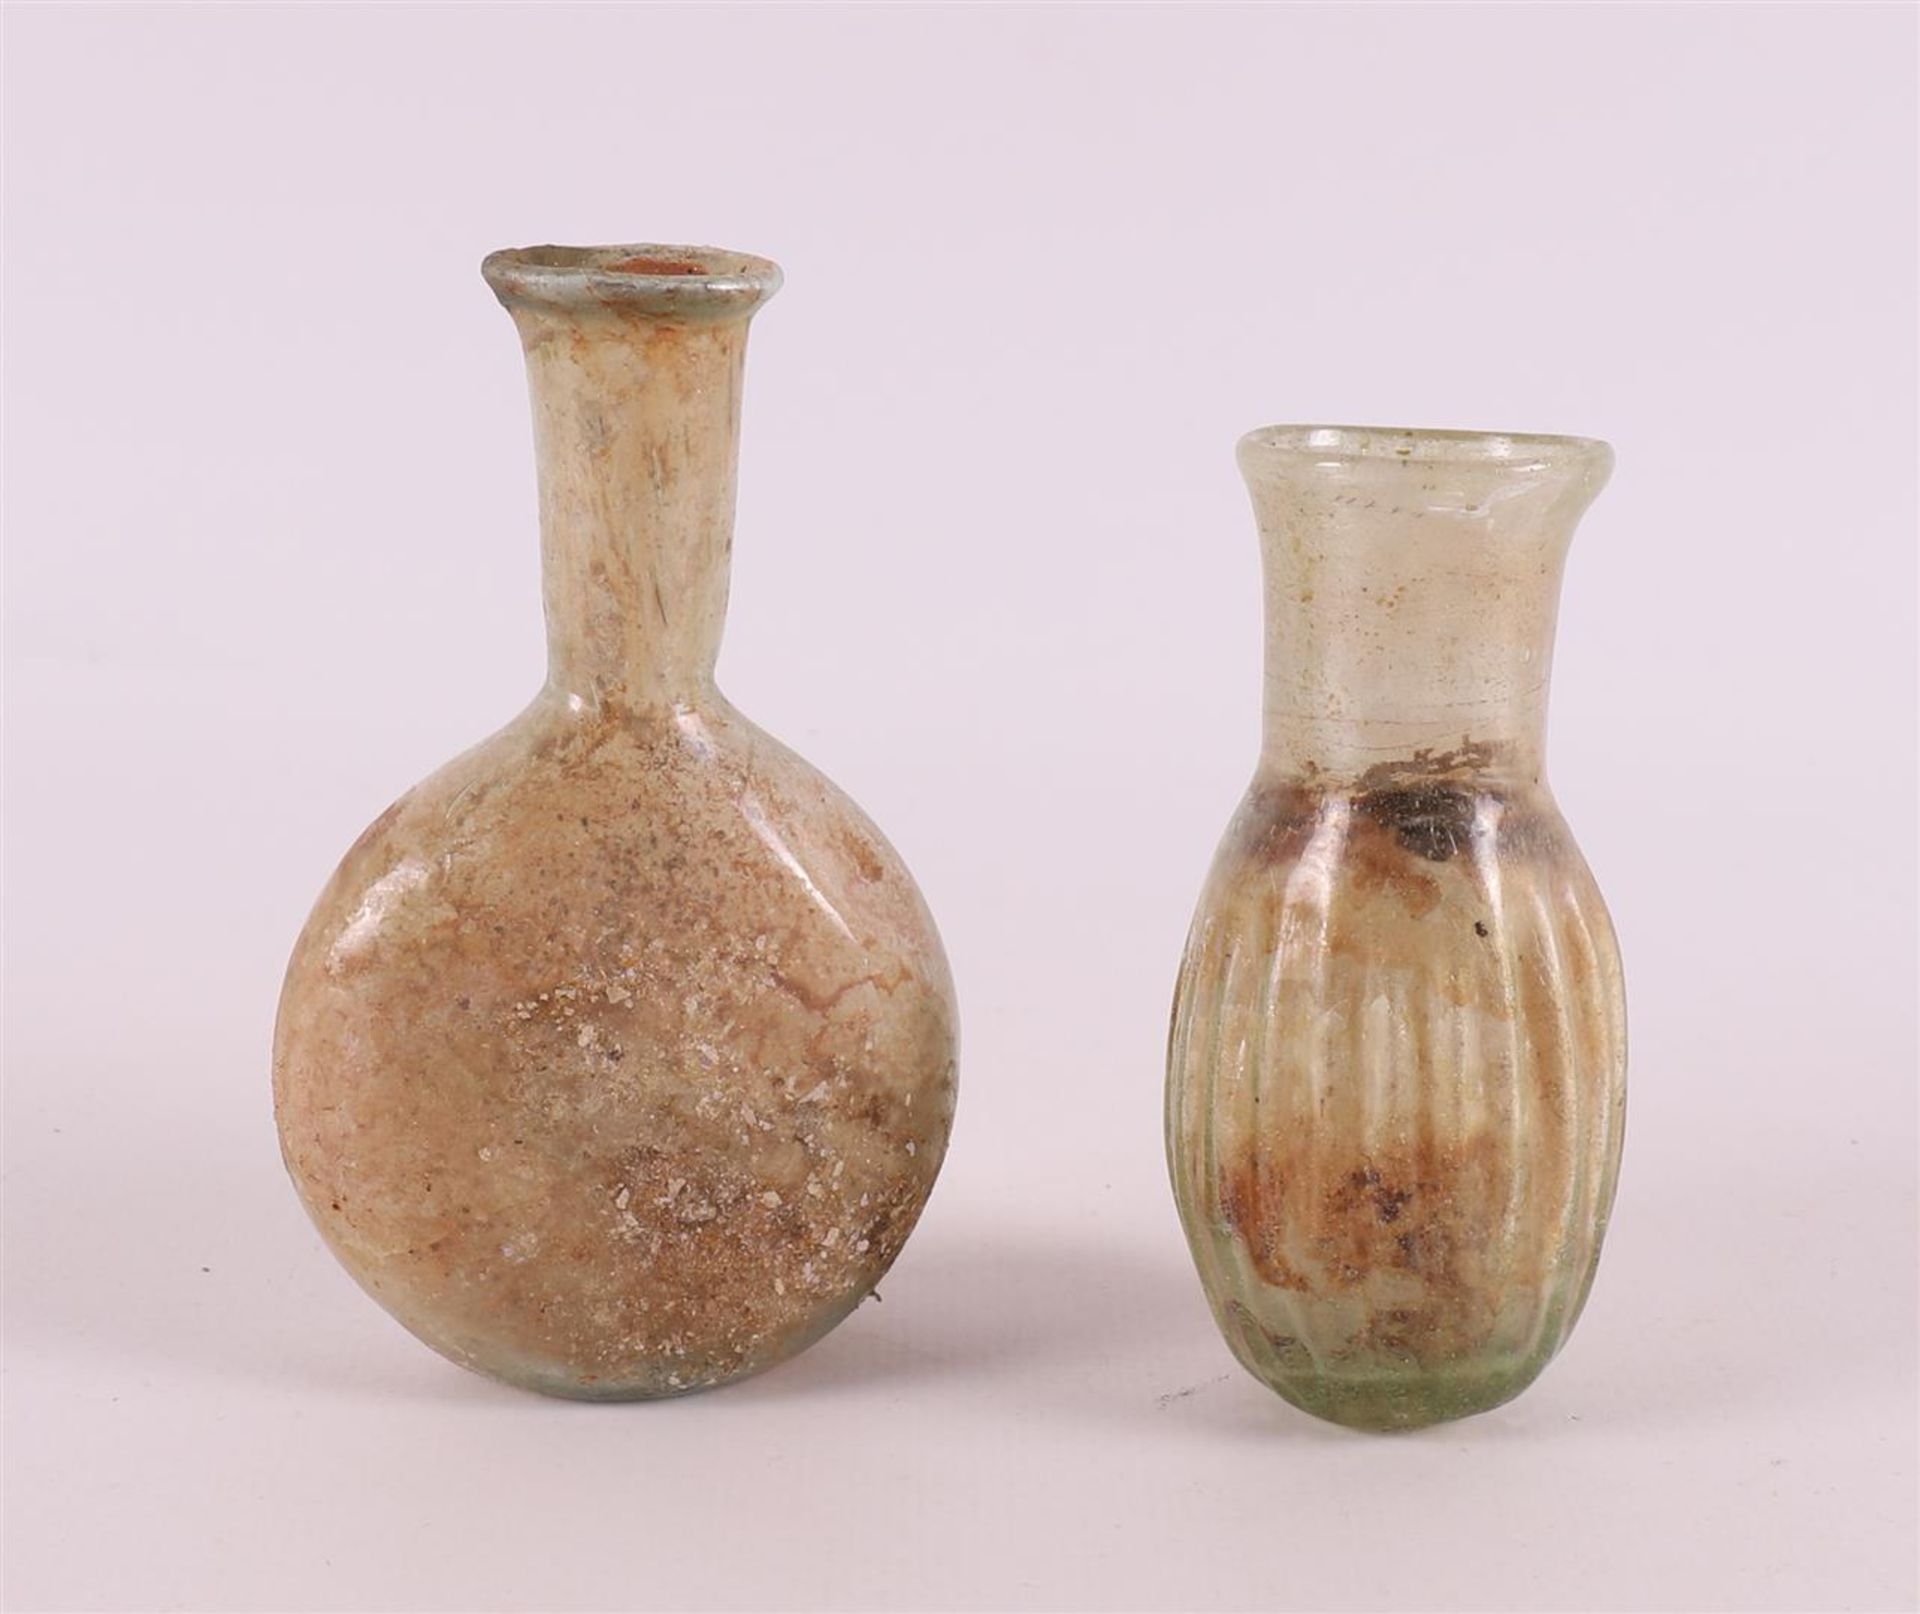 A Roman glass vase and bottle, 2nd - 4th century.